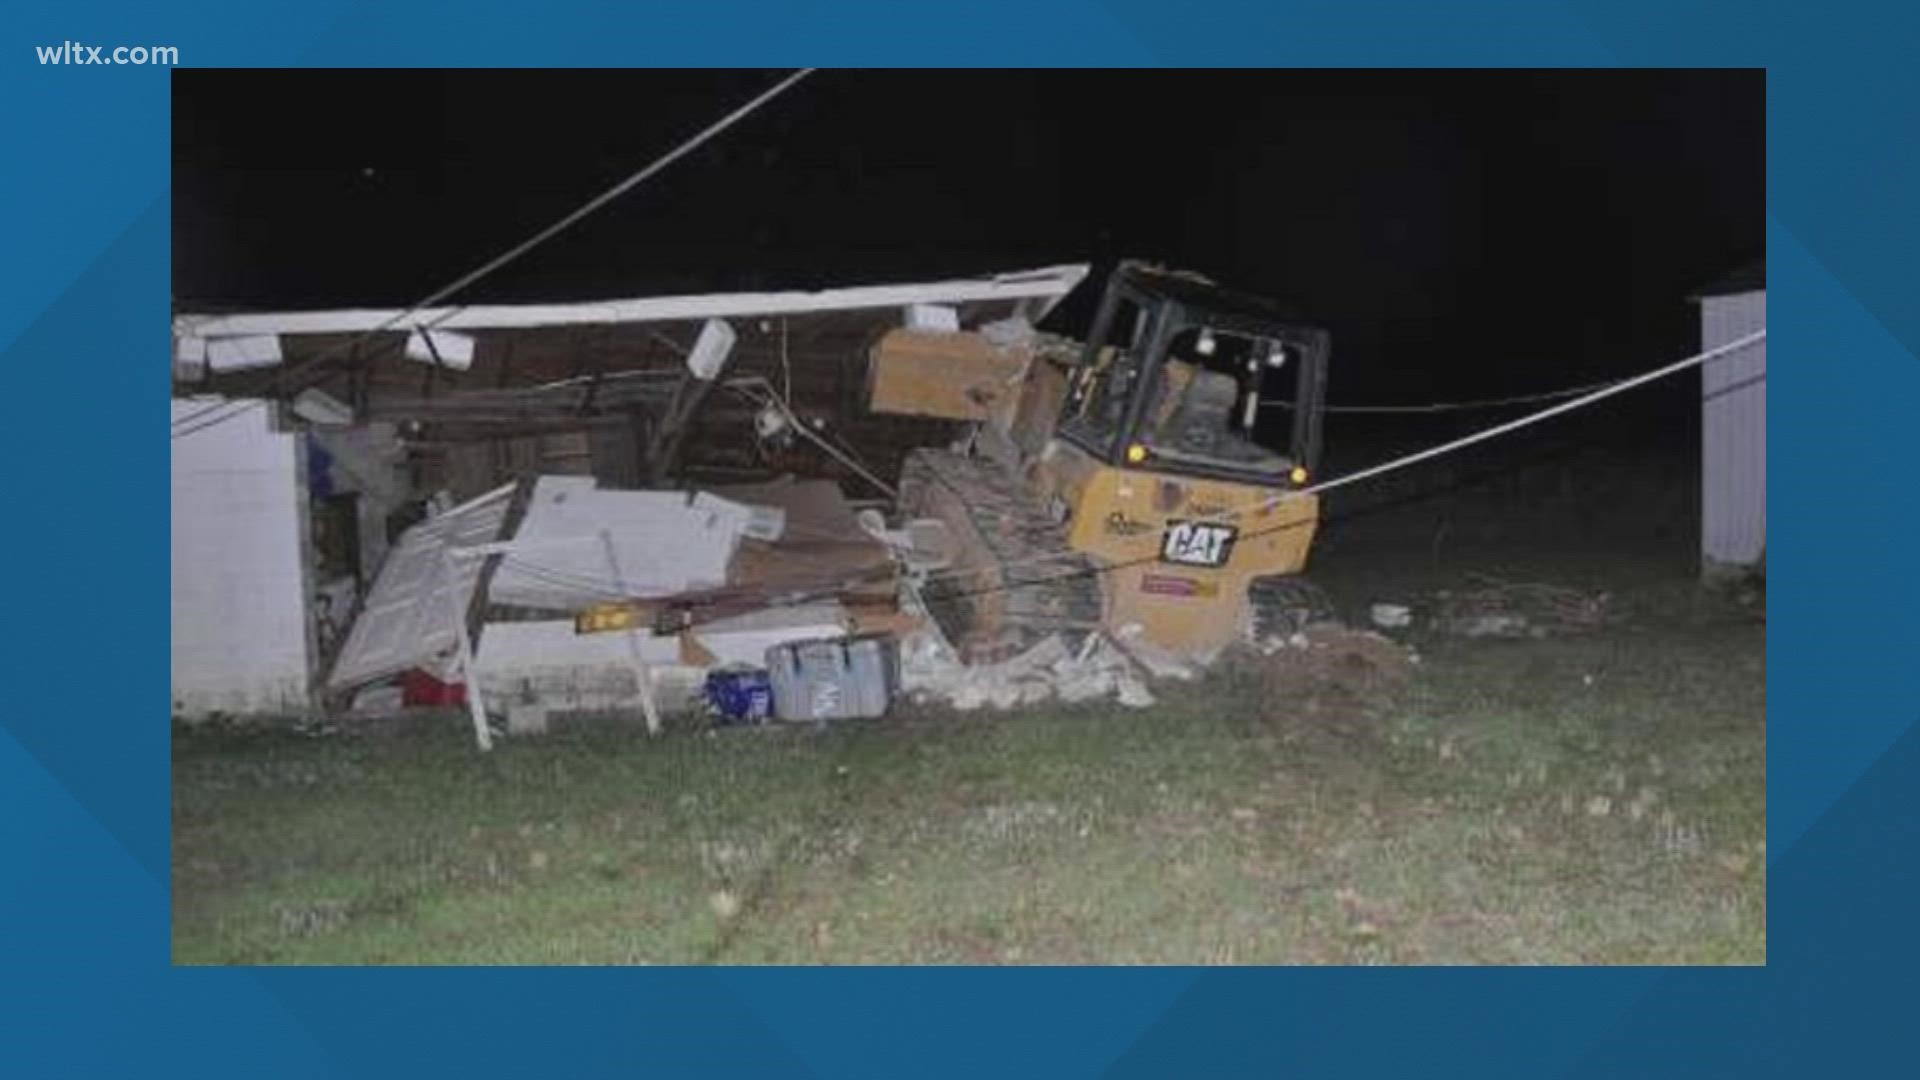 A 41-year-old man is facing charges after Newberry County deputies say plowed a bulldozer into a shed as part of a revenge plot.